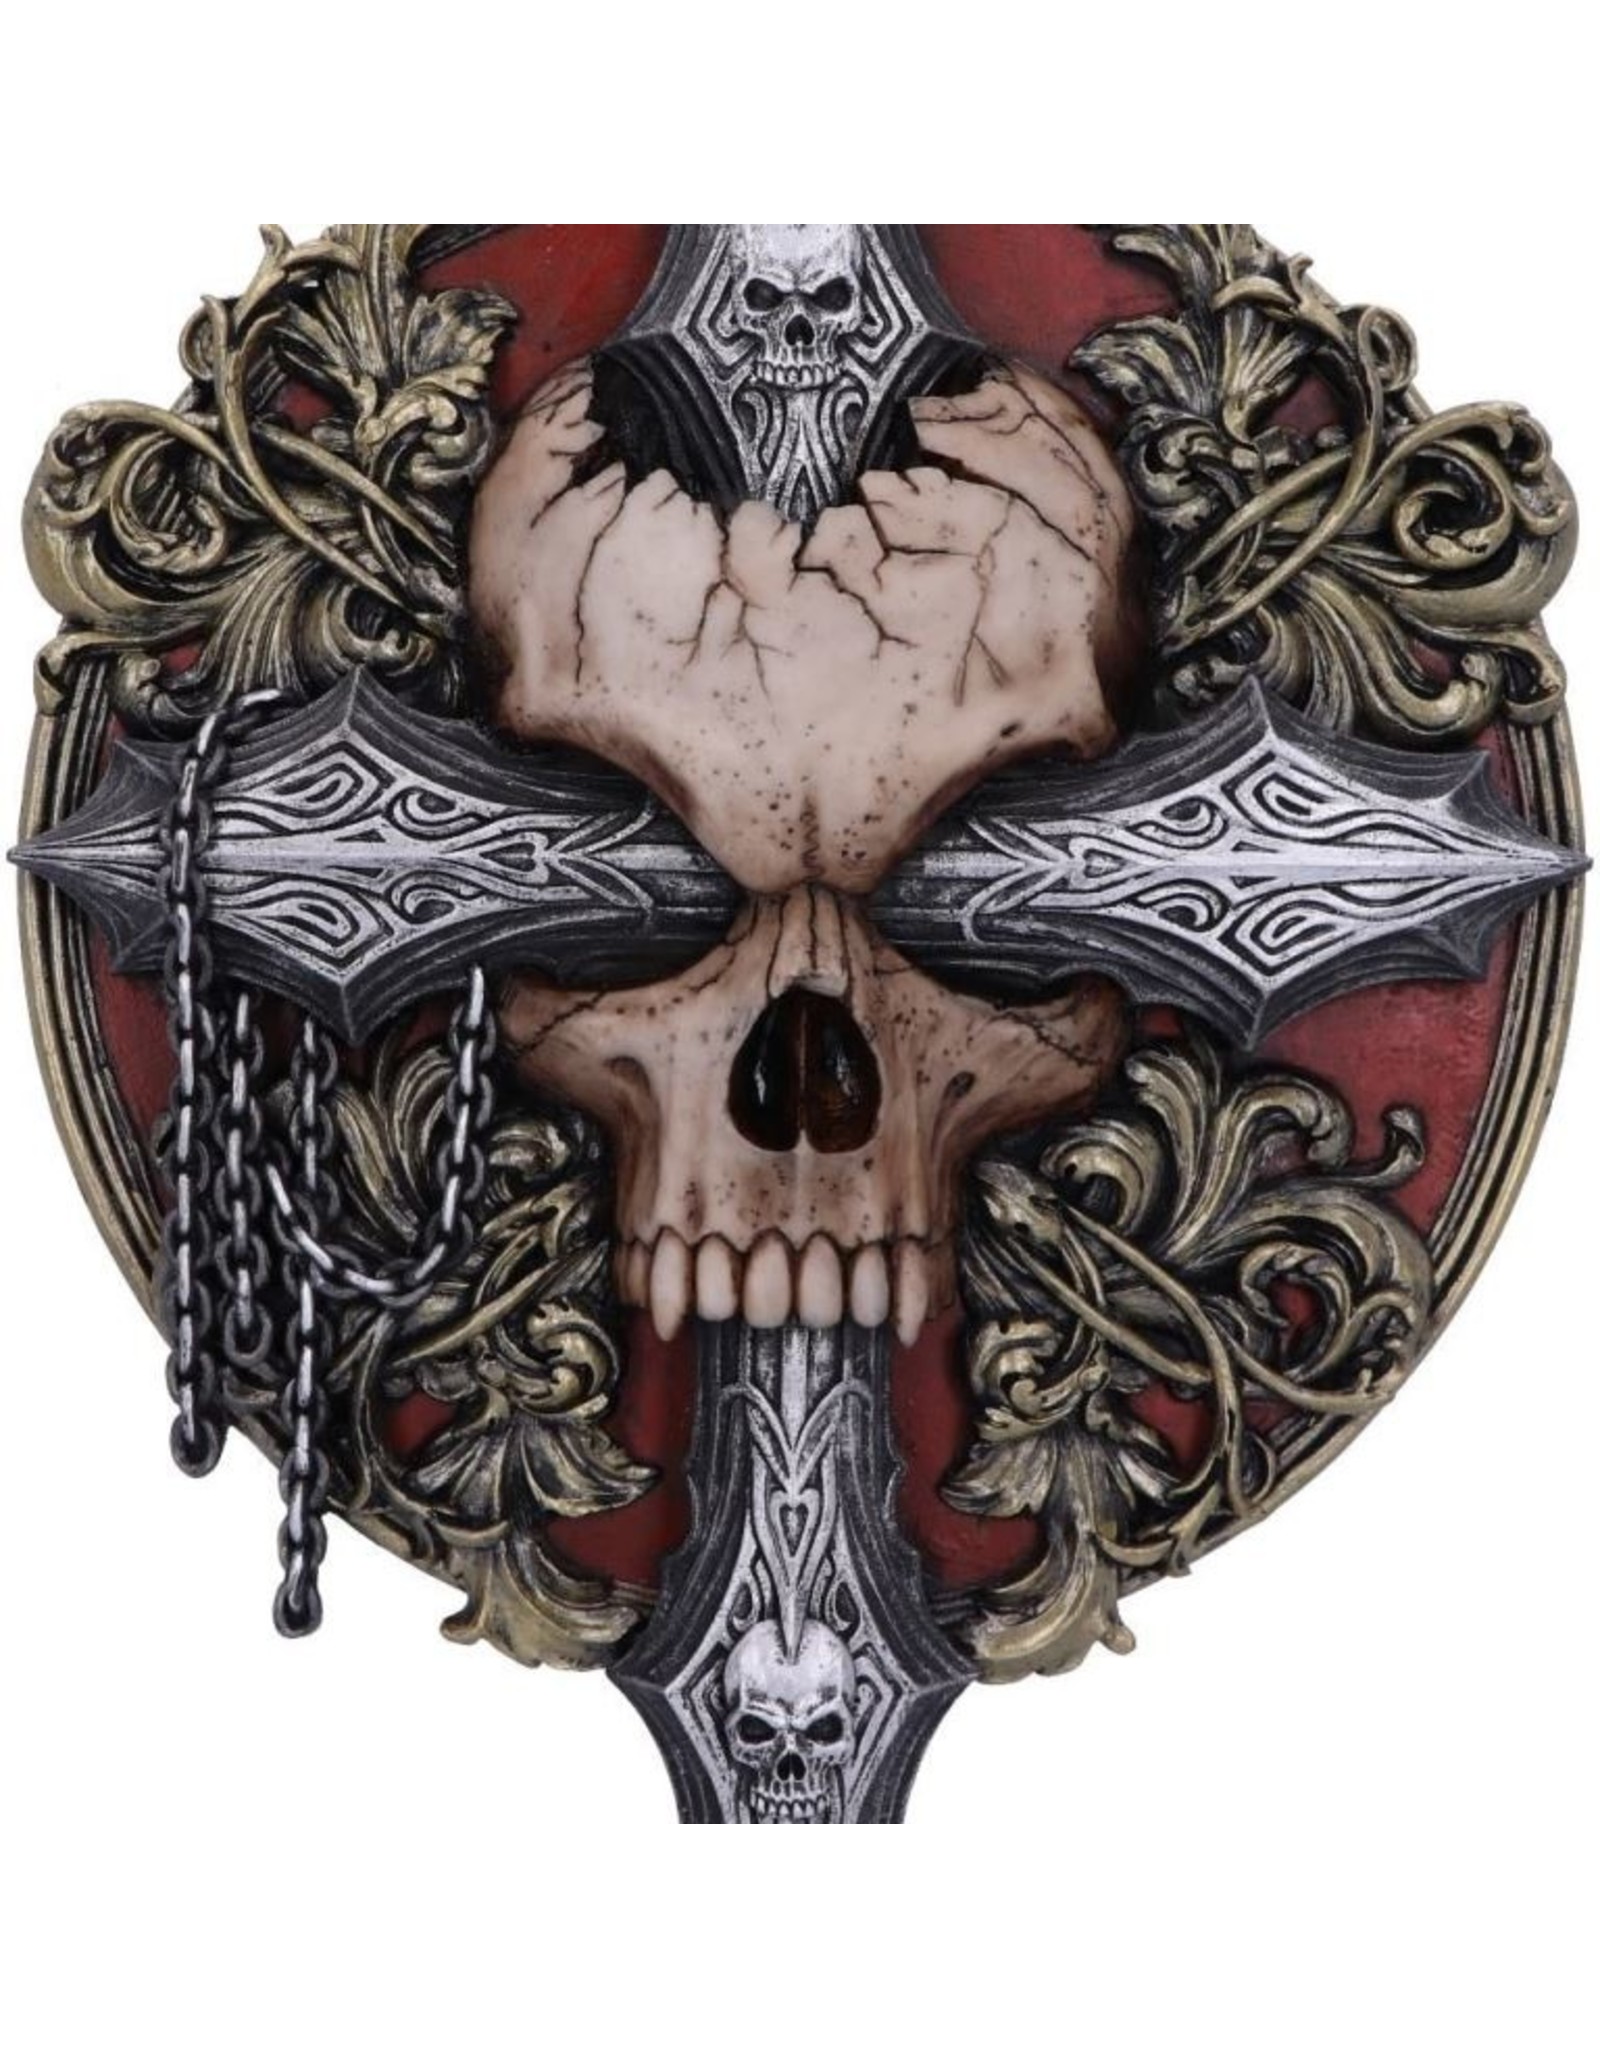 Spiral Direct Giftware & Lifestyle - Cross of Darkness Baroque Skull Wall Plaque - Spiral